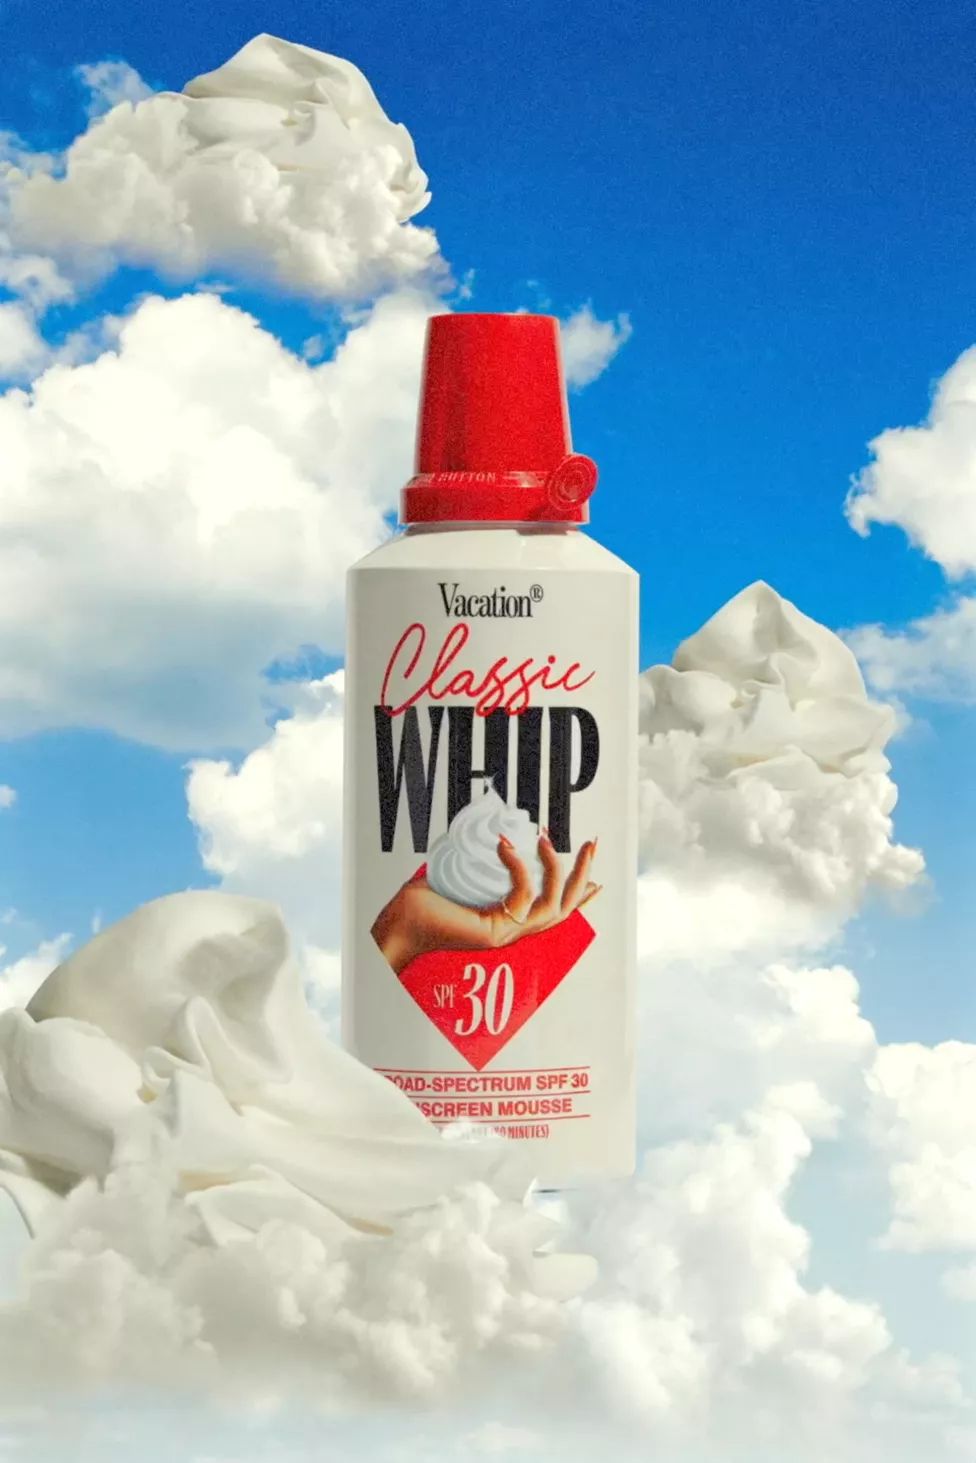 Vacation Classic Whip SPF30 Sunscreen | Urban Outfitters (US and RoW)